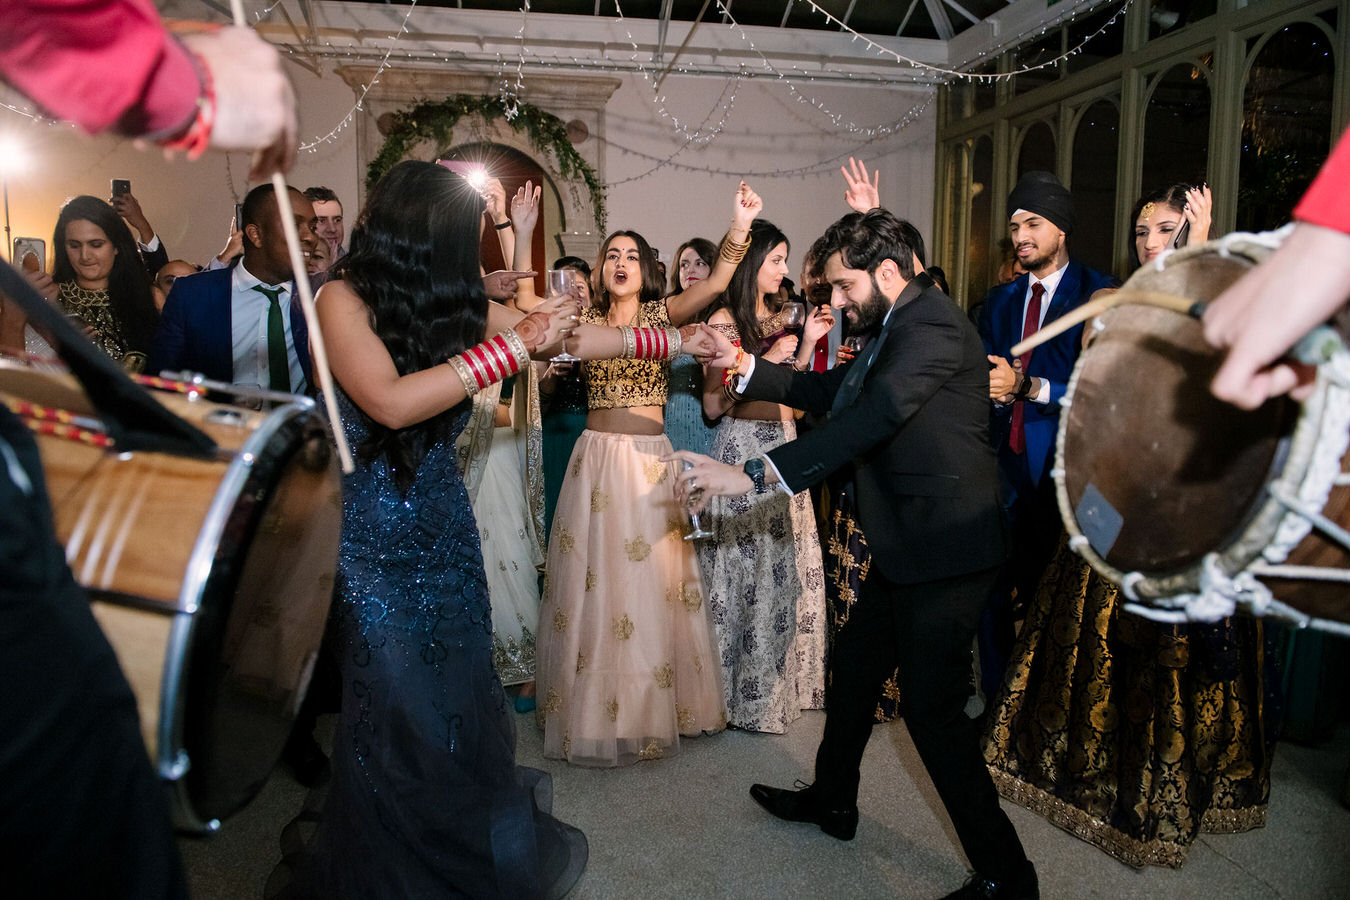 Asian wedding couple dancing with glasses in their hands along with other guests. Asian Dhol drummers are playing in the foreground.